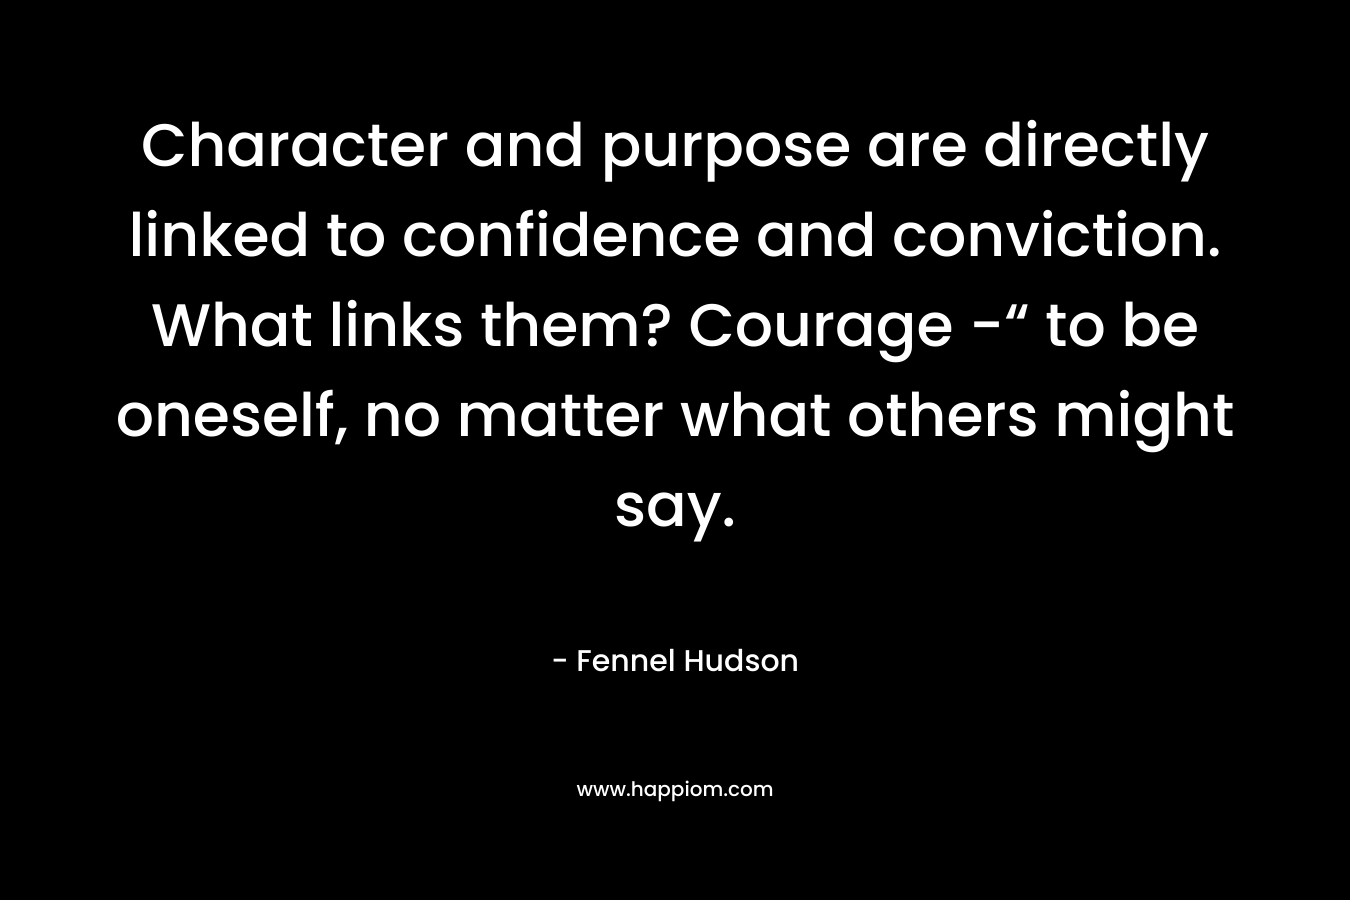 Character and purpose are directly linked to confidence and conviction. What links them? Courage -“ to be oneself, no matter what others might say. – Fennel Hudson